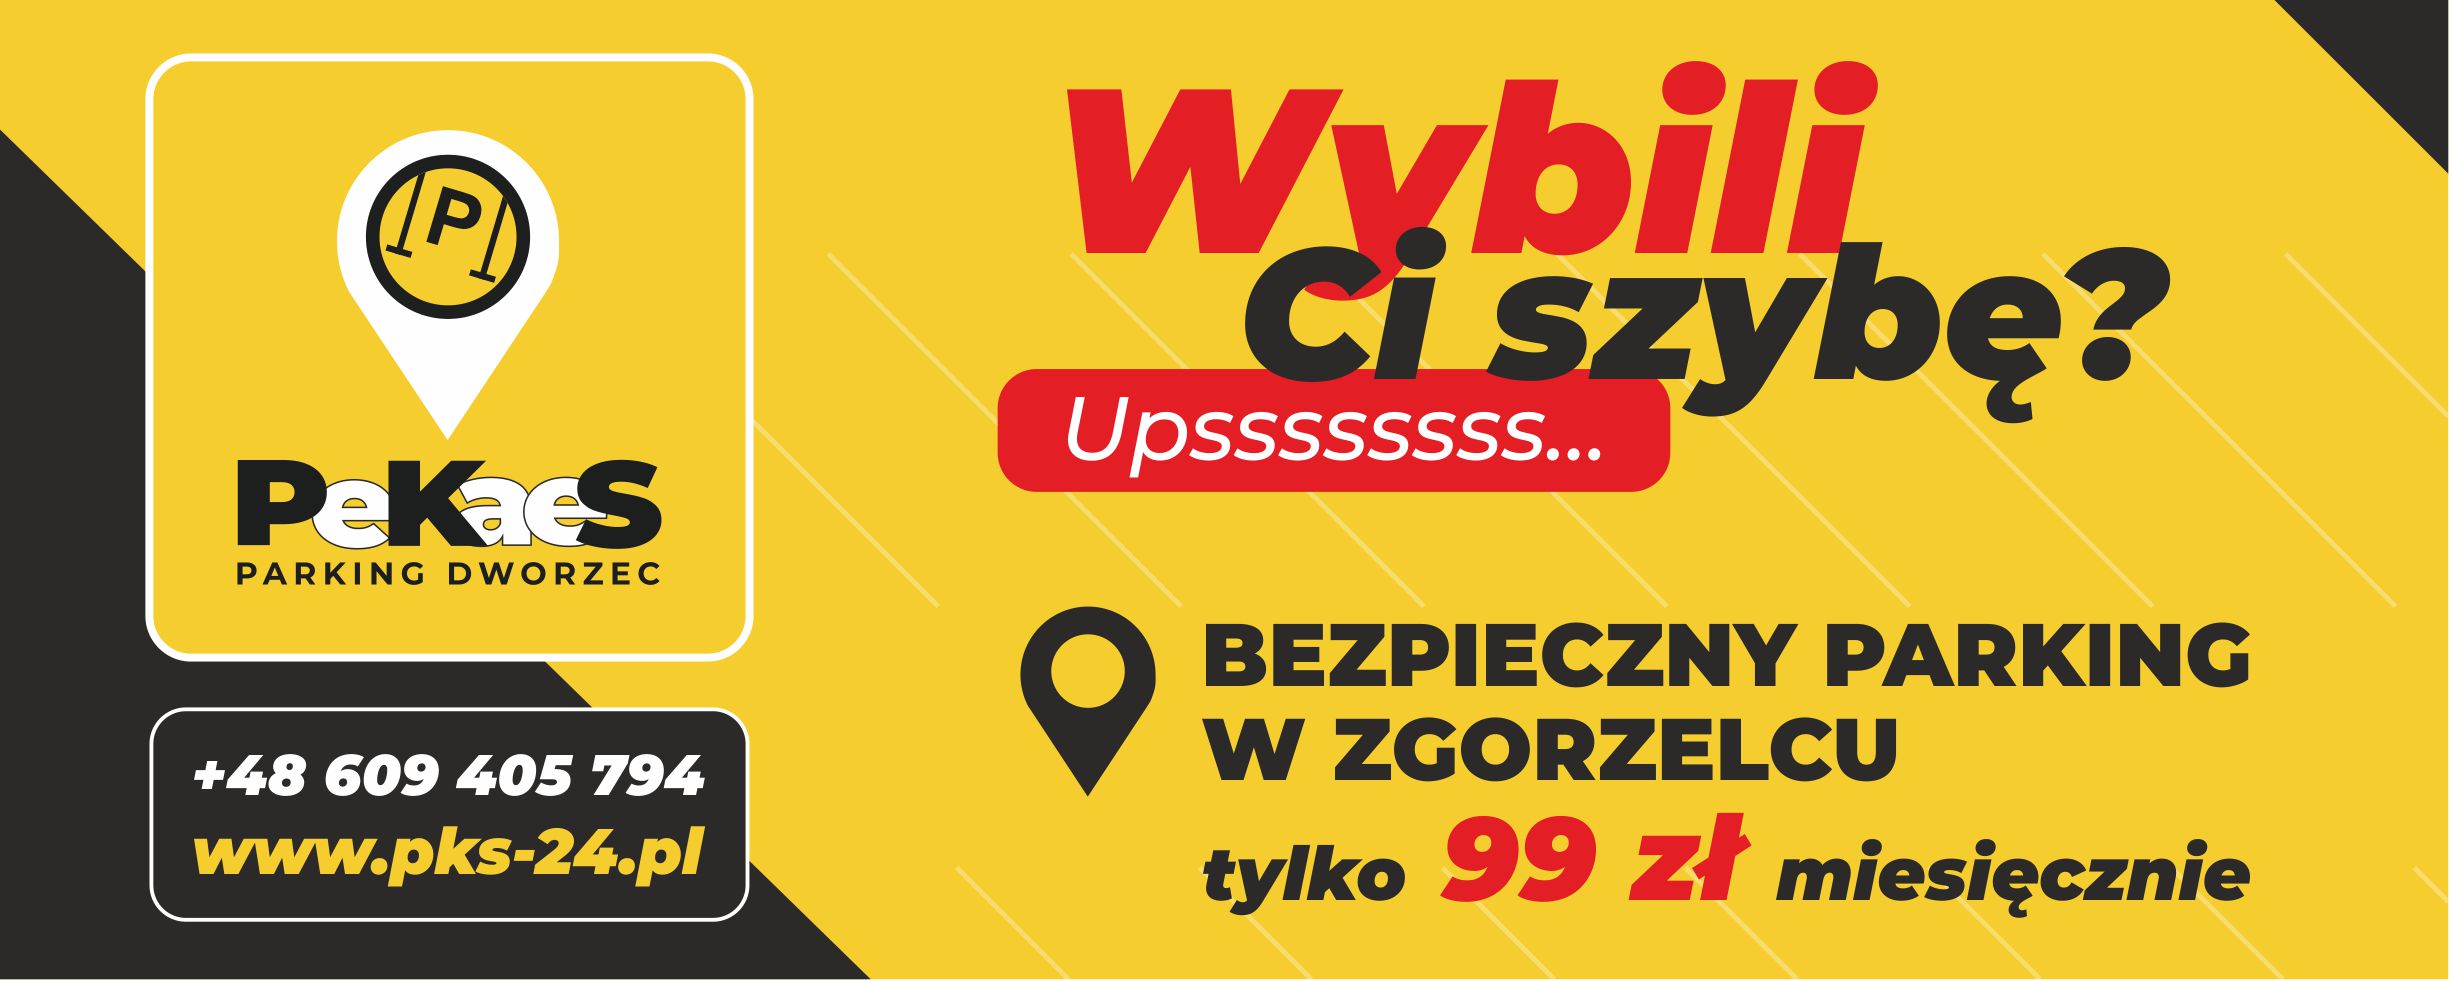 You are currently viewing Wybili Ci szybę? Upsssss…